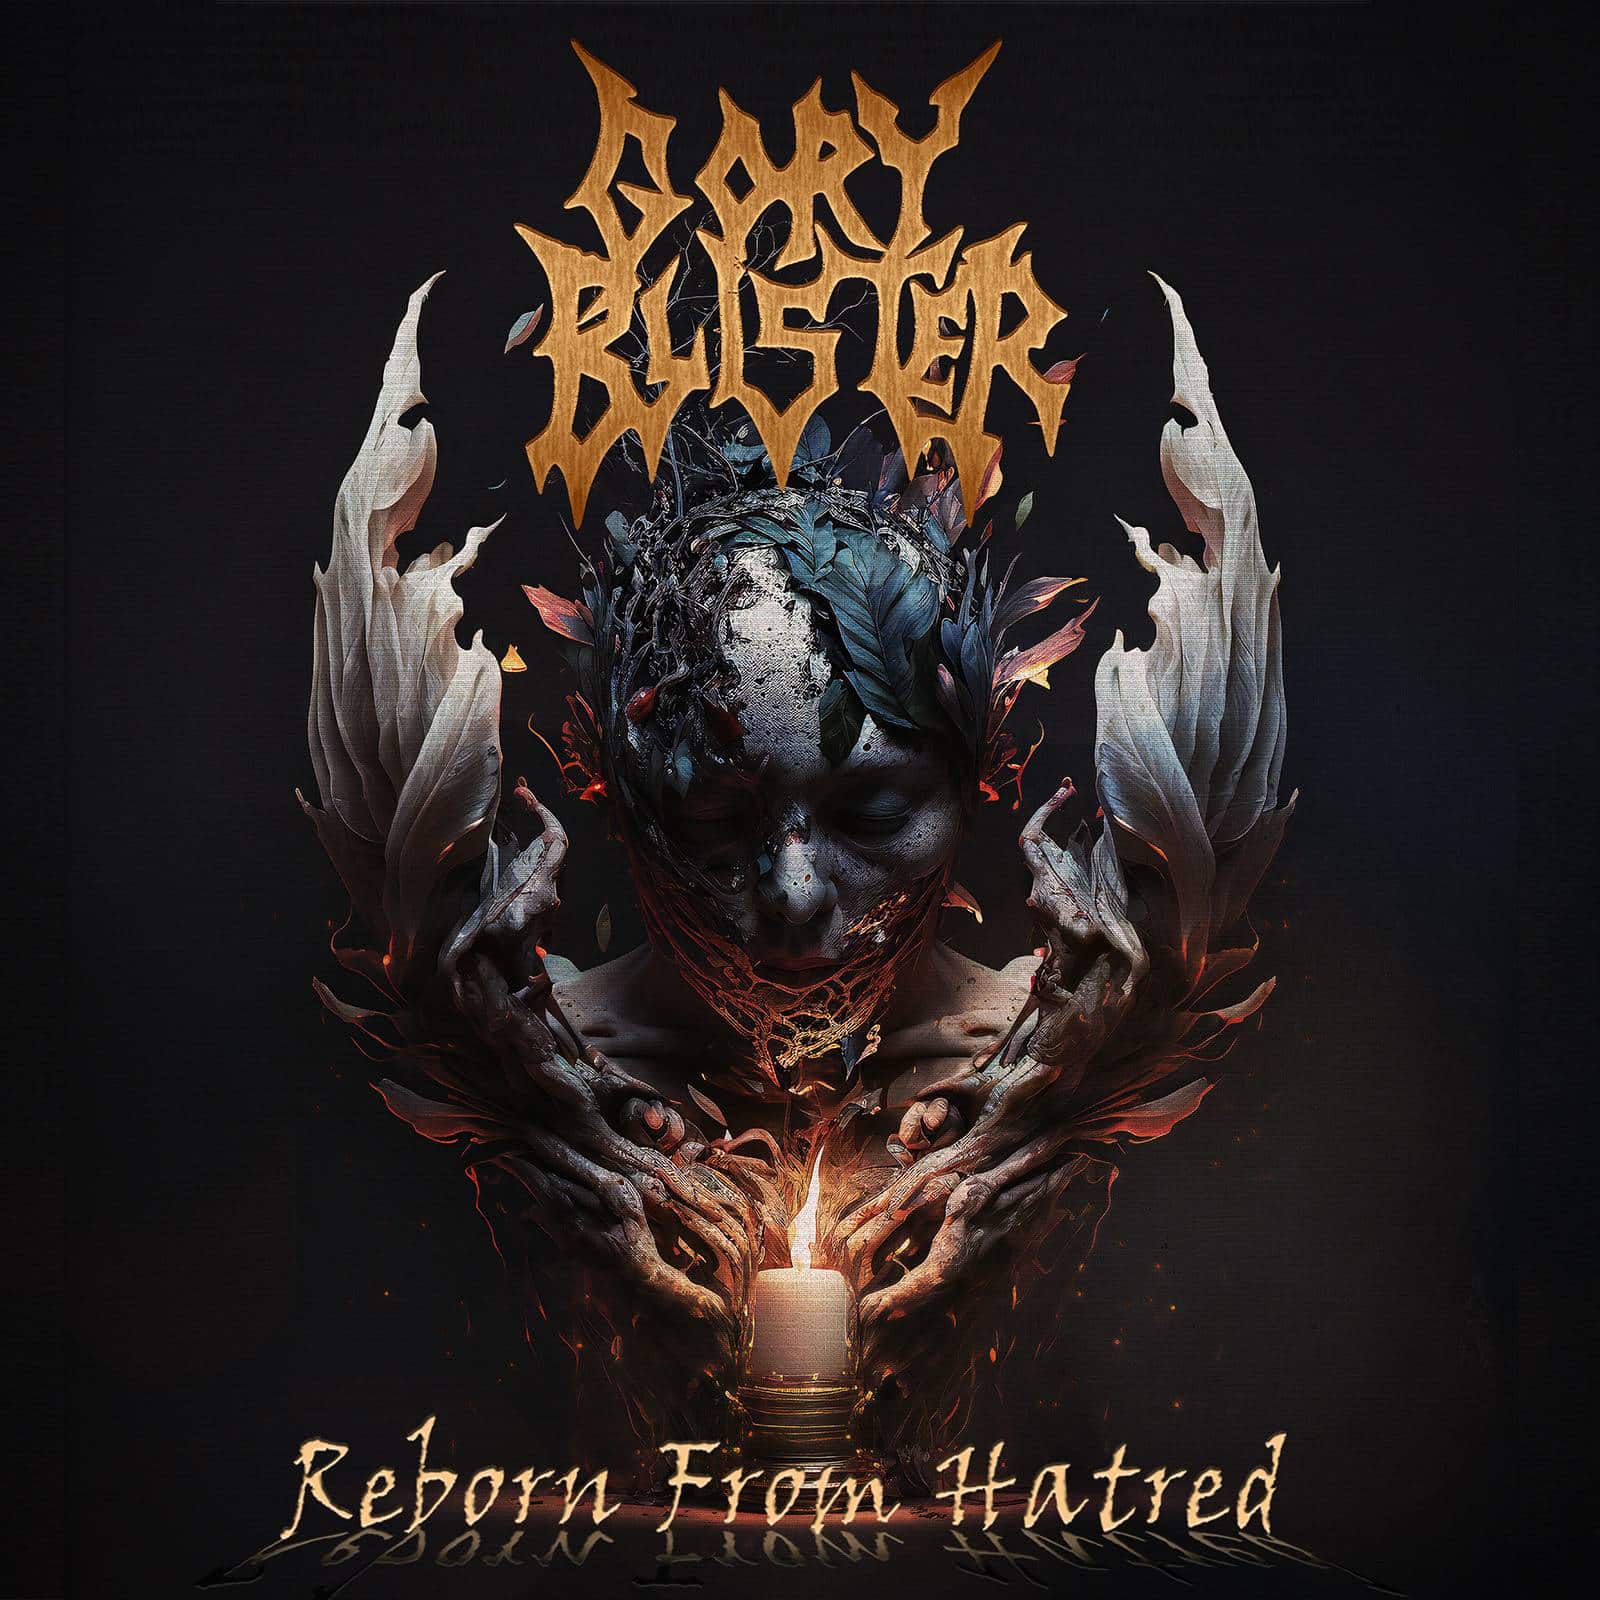 Gory Blister: "Reborn from Hatred" CD and digital 8th September 2023 Eclipse Records.